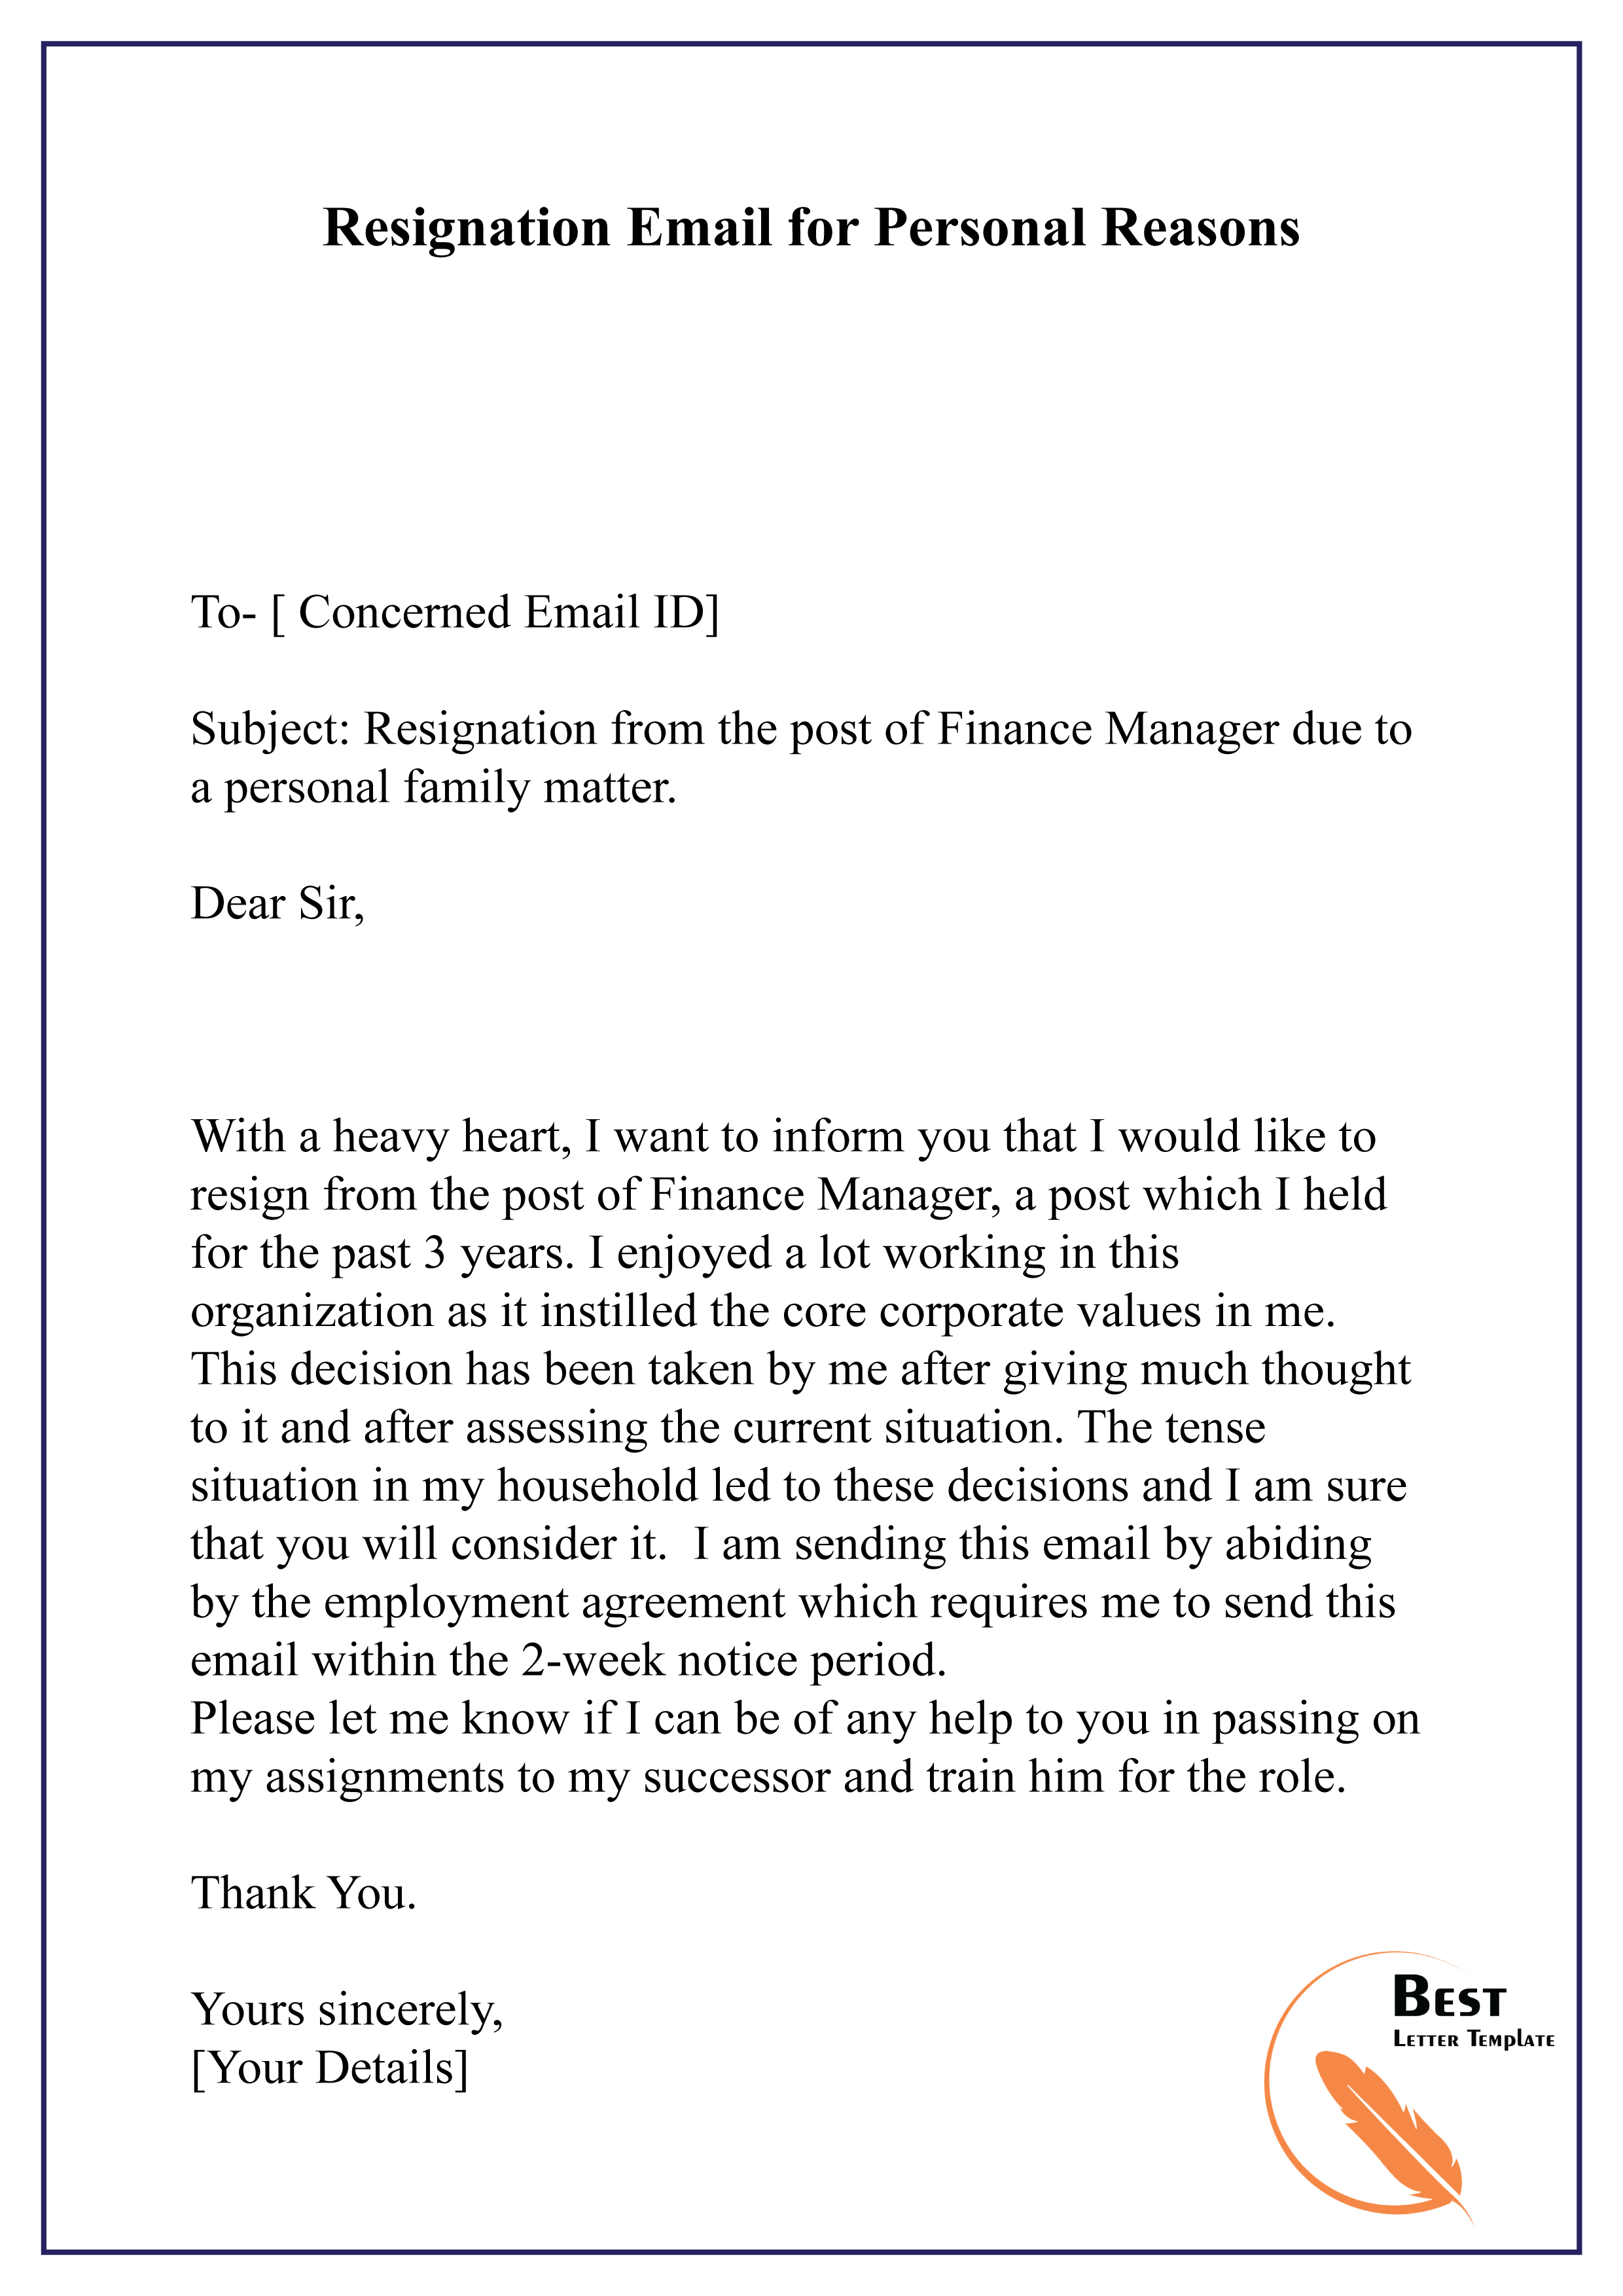 Resignation Email for Personal Reasons